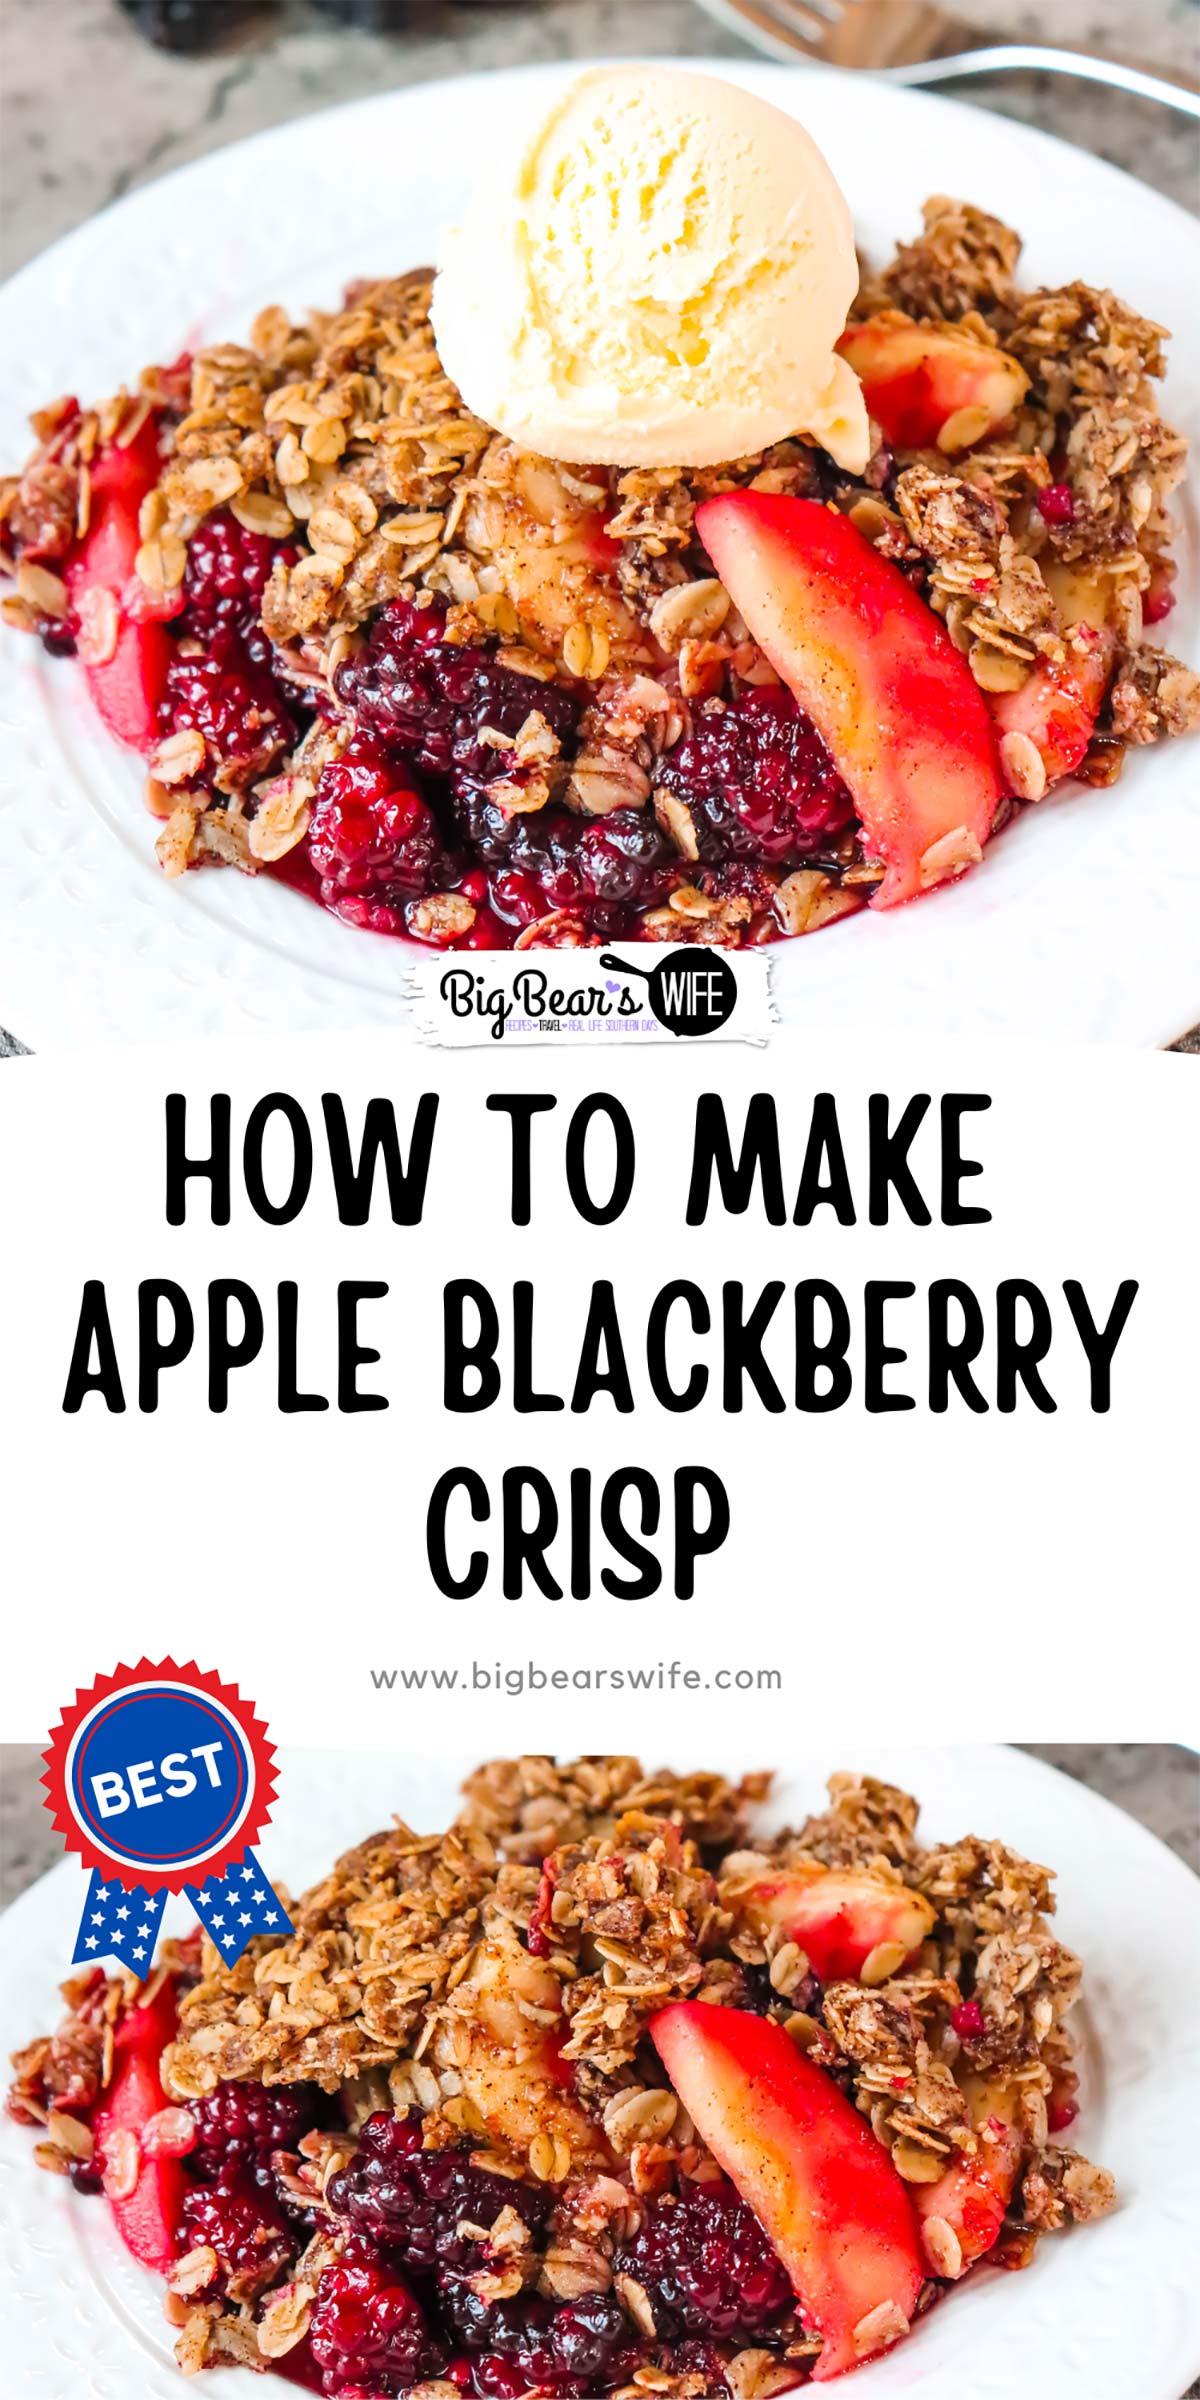 Fill your home with the fabulous smell of apples, blackberries and cinnamon with this easy homemade apple blackberry crisp recipe! Bake until hot and serve with a cold scoop of vanilla ice cream for the perfect after dinner treat! via @bigbearswife